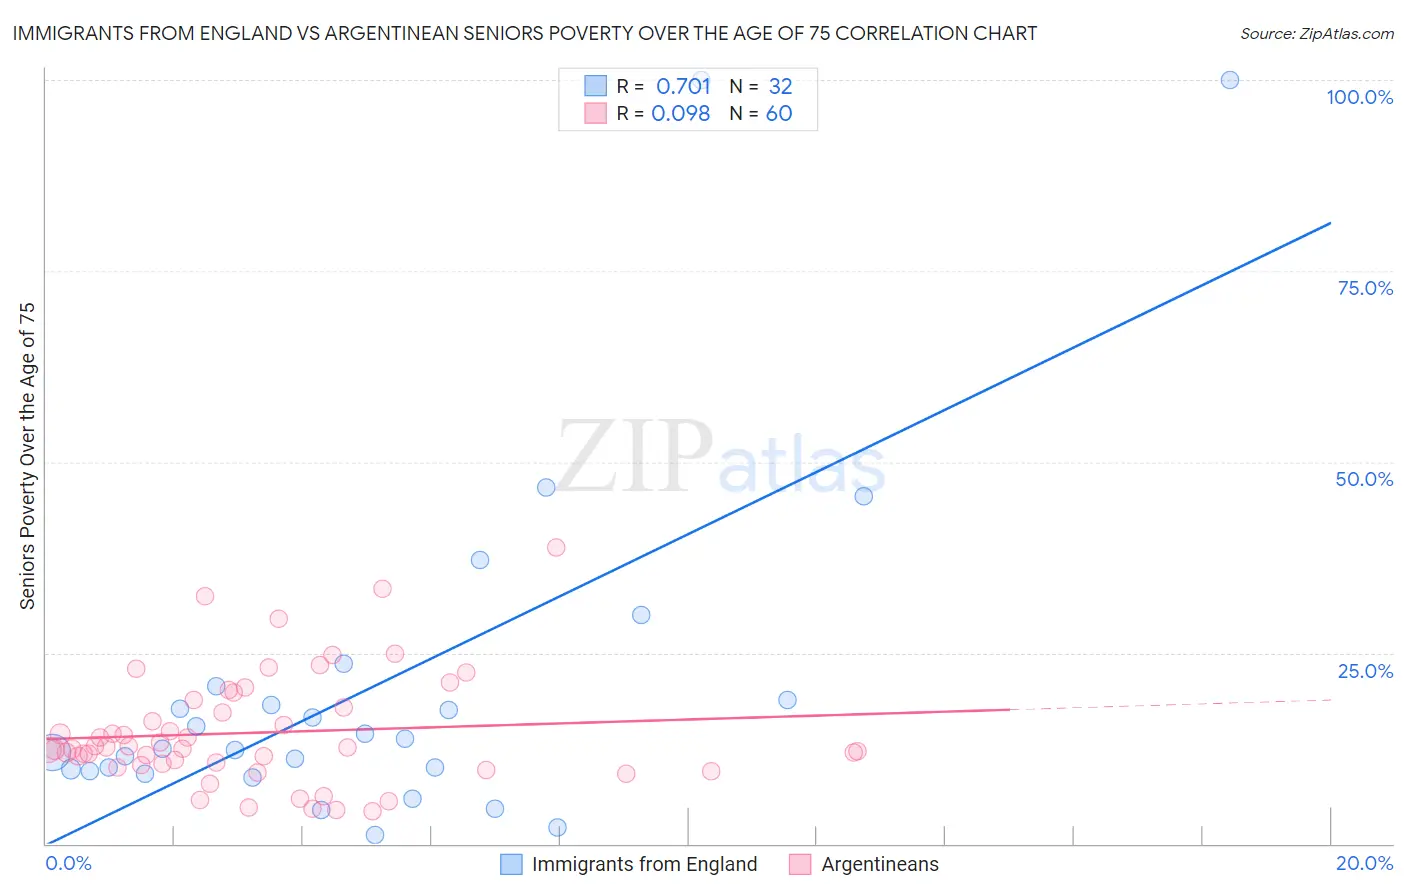 Immigrants from England vs Argentinean Seniors Poverty Over the Age of 75